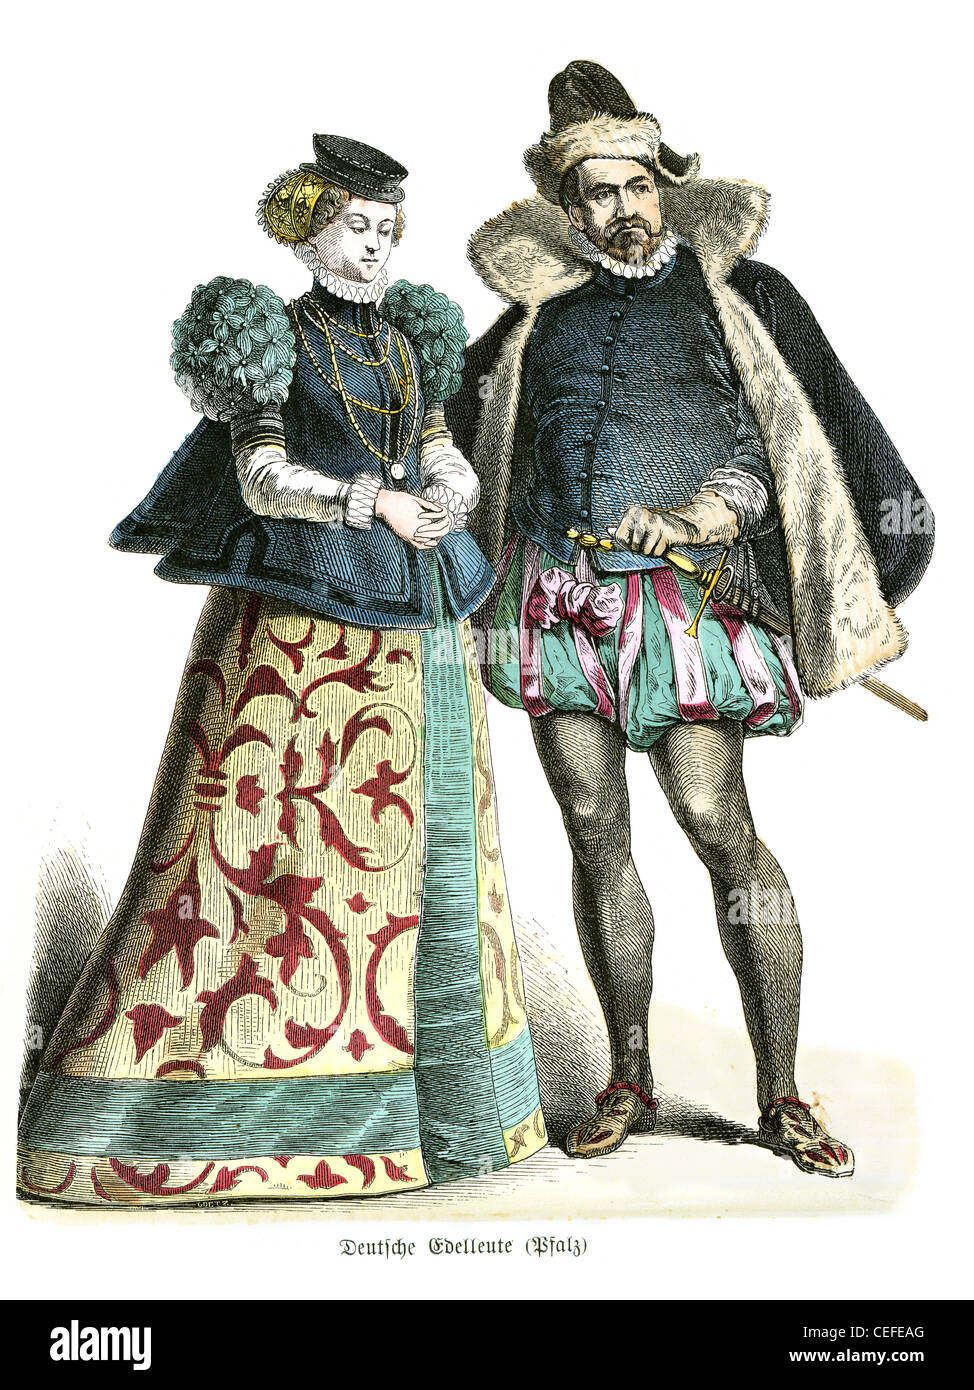 A German noble man and woman in the fashion of the late 16th century Stock  Photo - Alamy